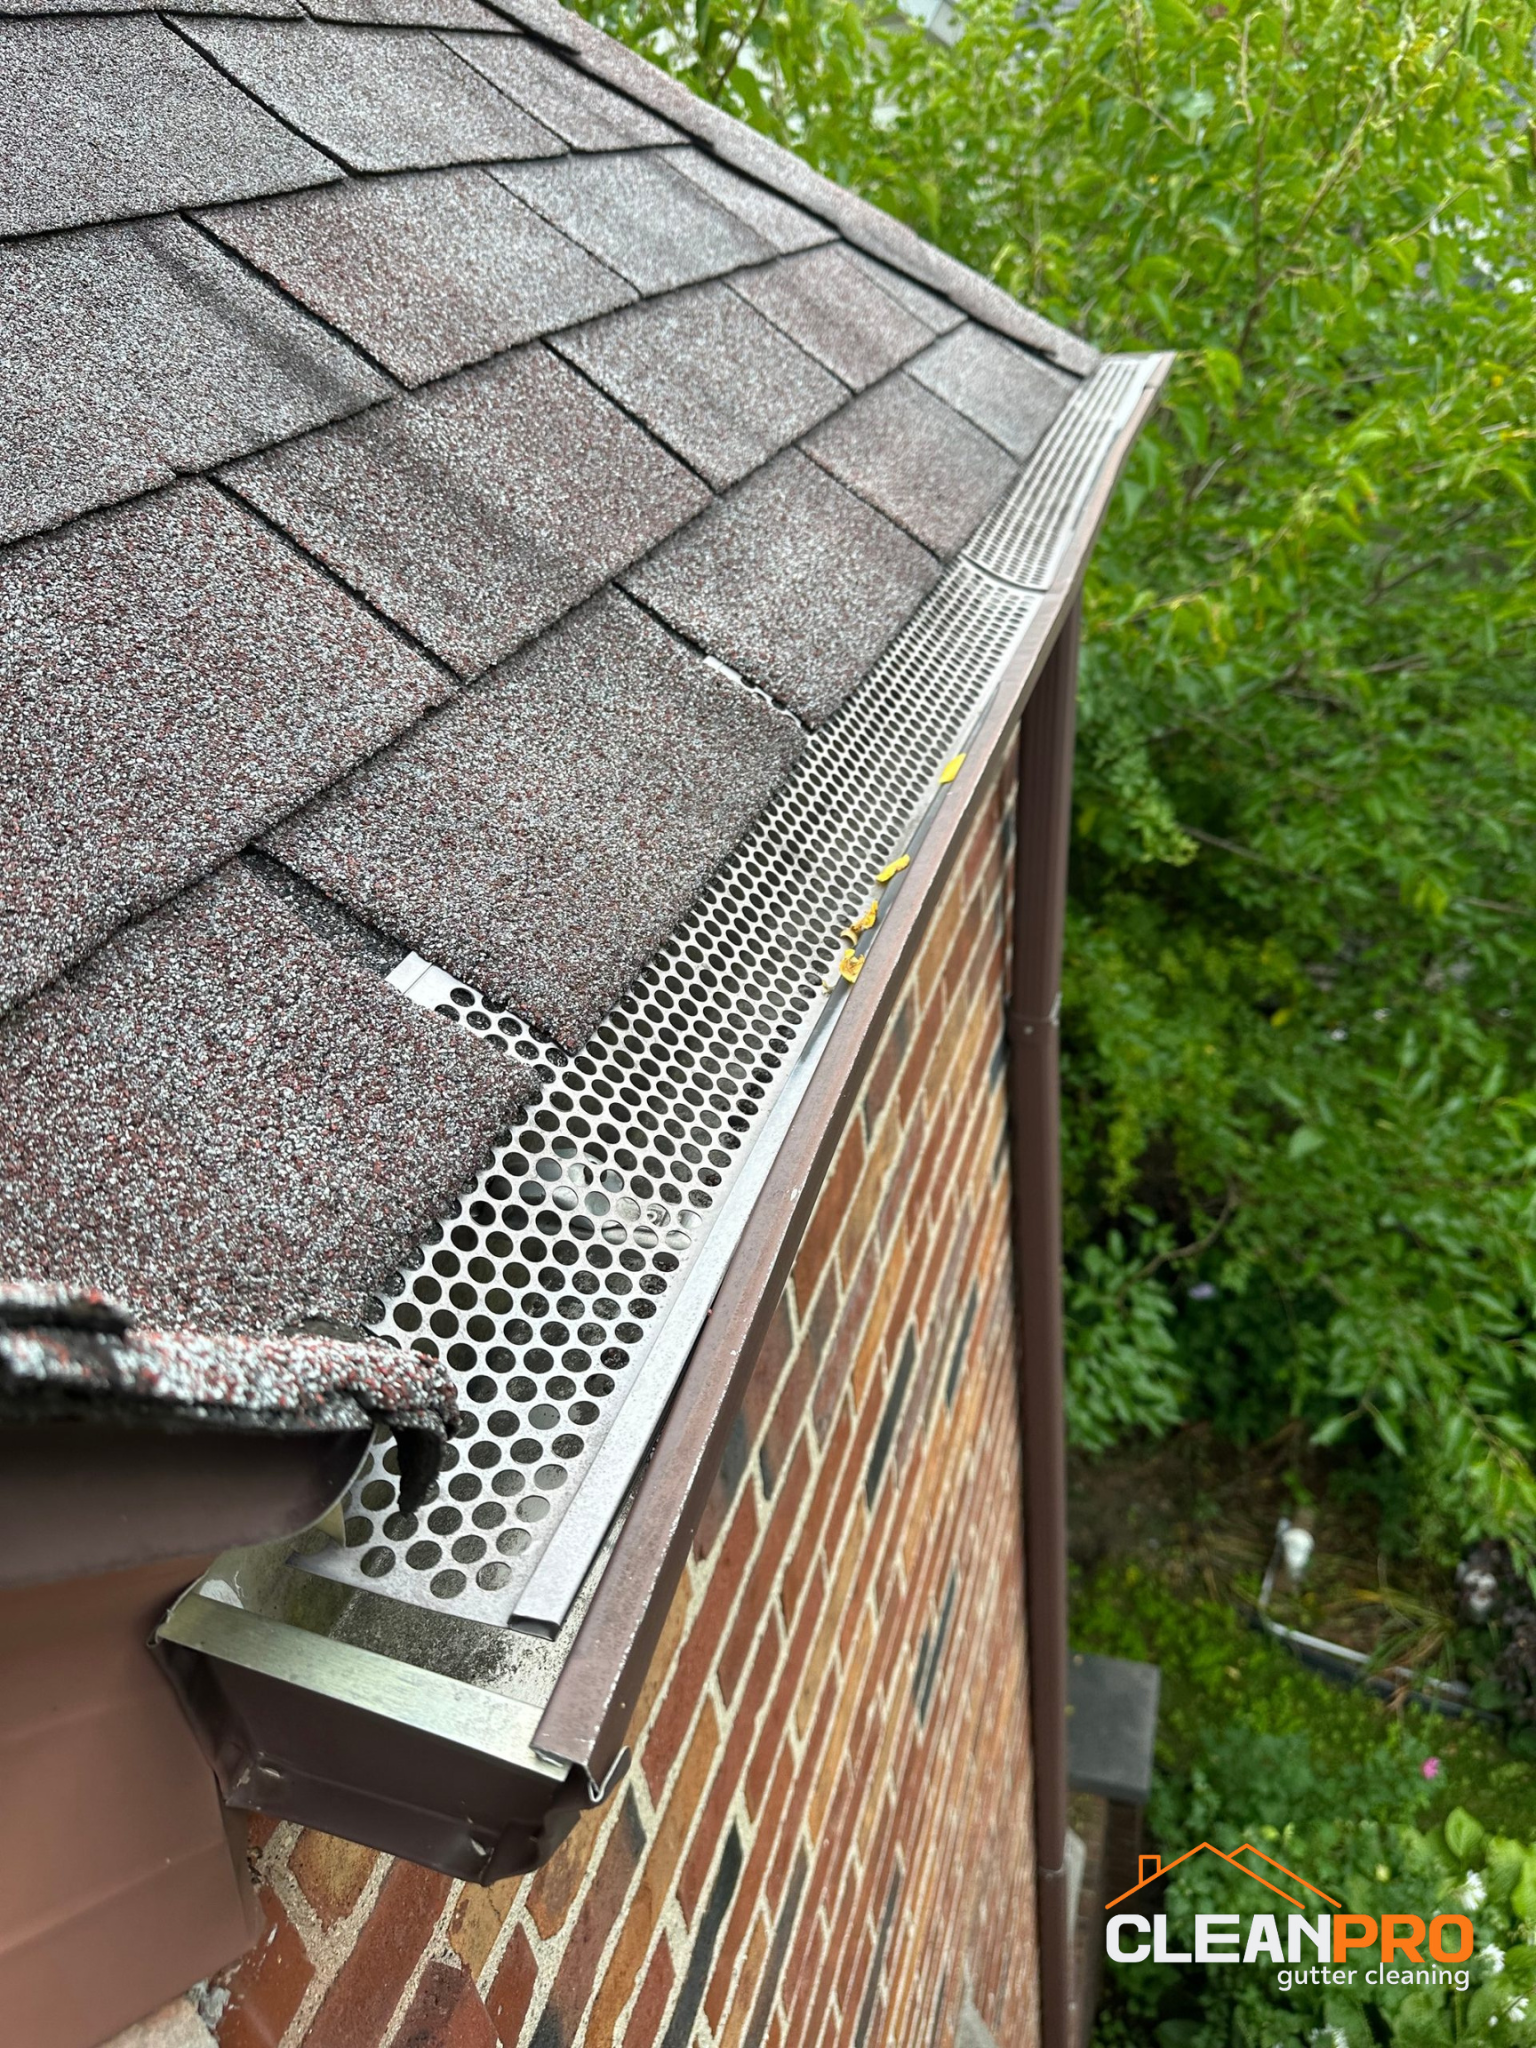 Gutter Cleaning in Birmingham for Carla Home